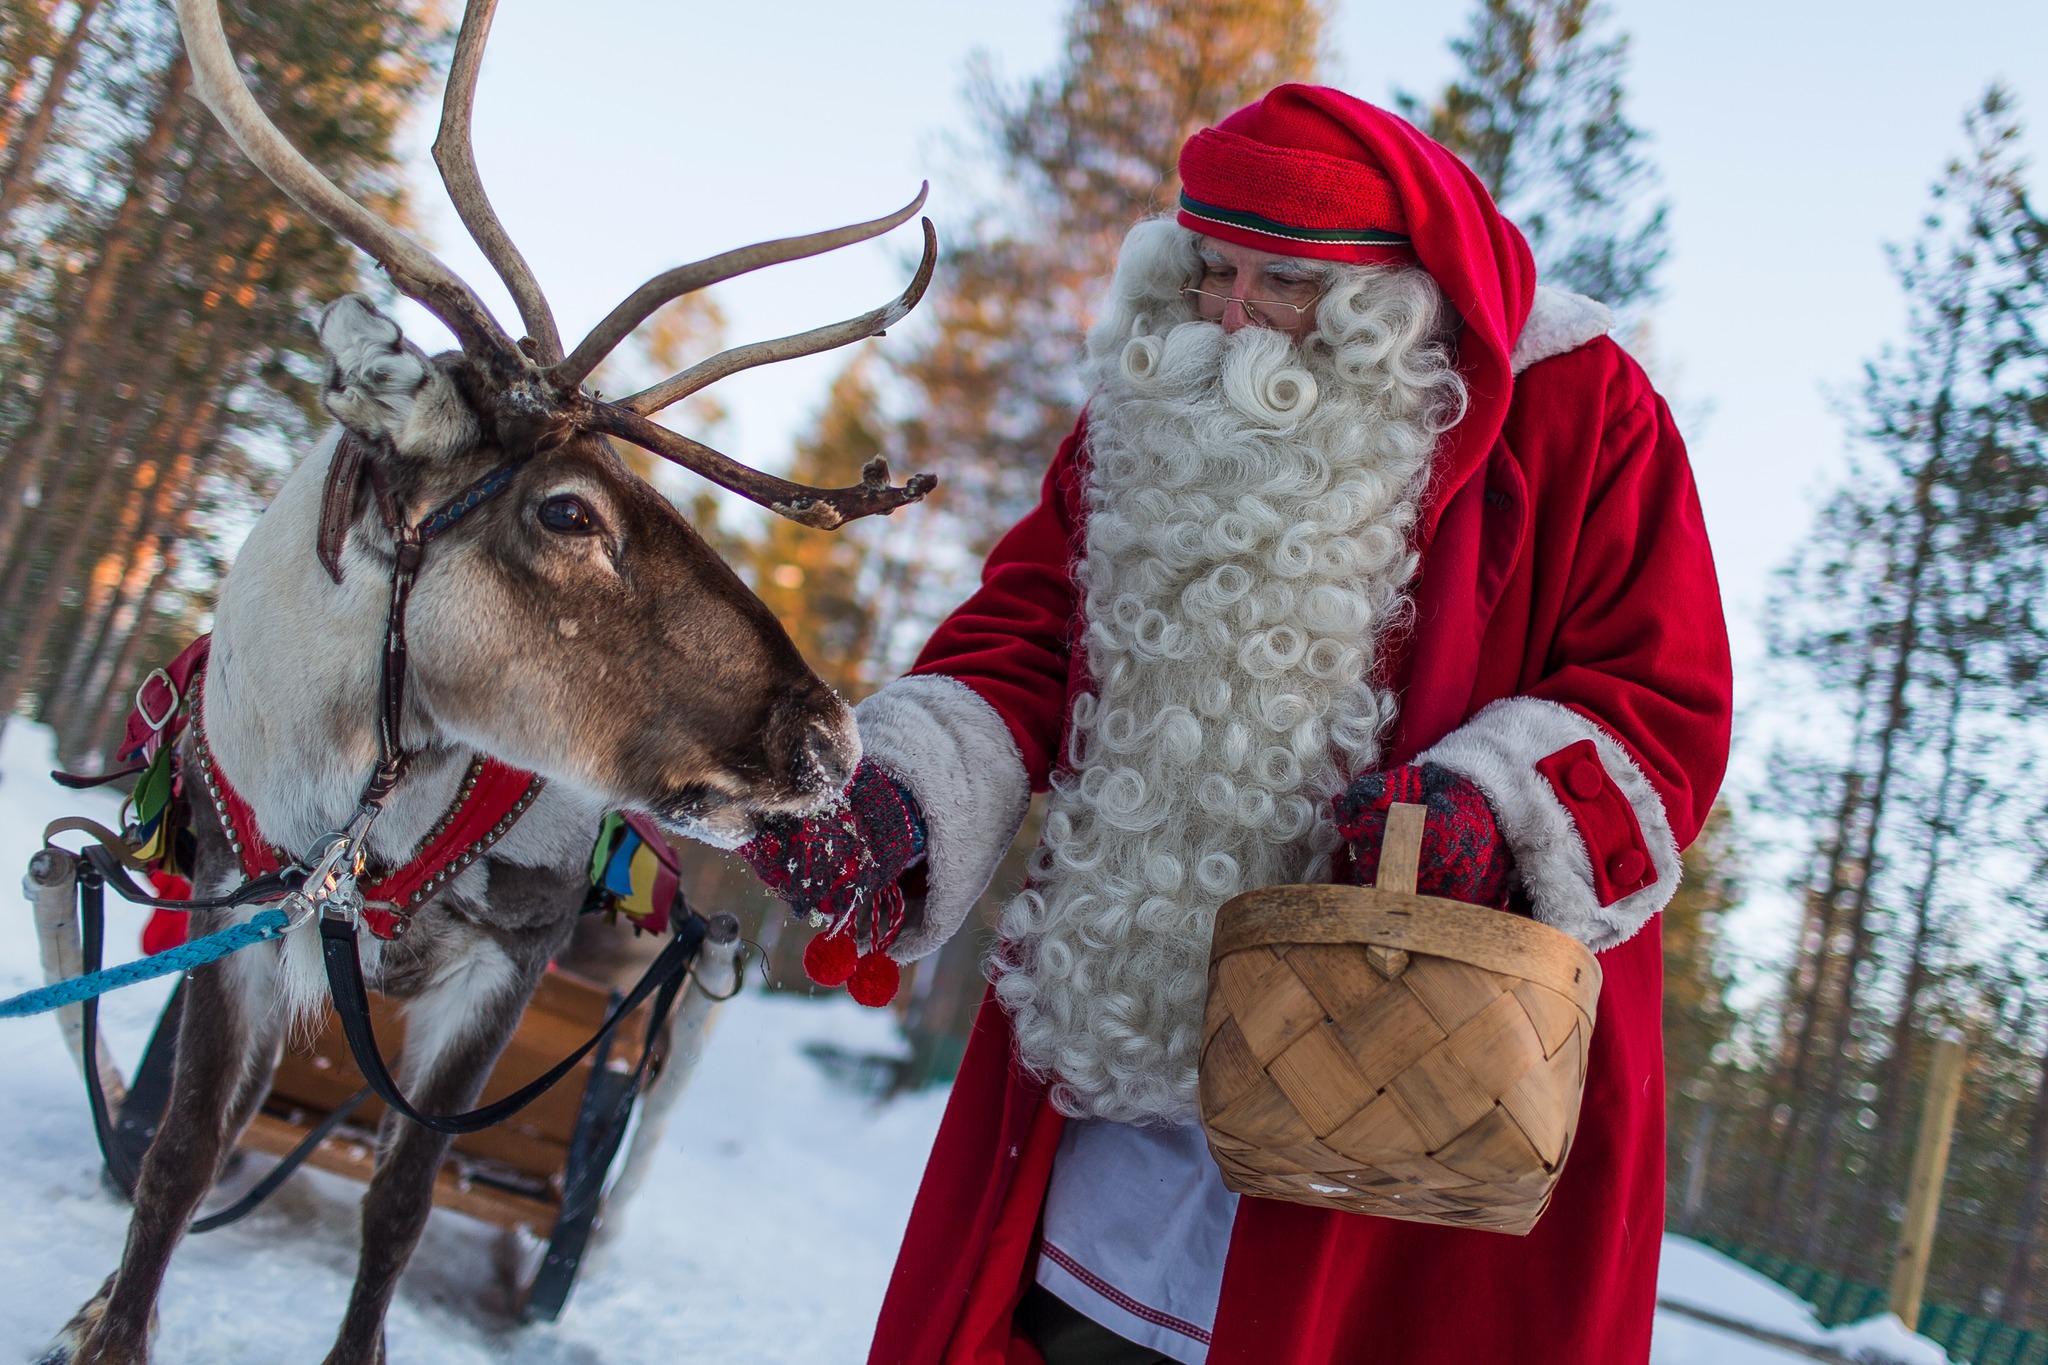 A month from now another exciting Live Stream will be available! The 23th of December Santa Claus will start his annual journey from Arctic Circle and travels across the world. You can join the free event at the Santa Claus Village or via Live Stream. Stay tuned.... @santaclausoffice @santaclausreindeer #visitrovaniemi #rovaniemichristmas #santaclaus #christmas #VisitFinland #lapland #santaclausisonhisway